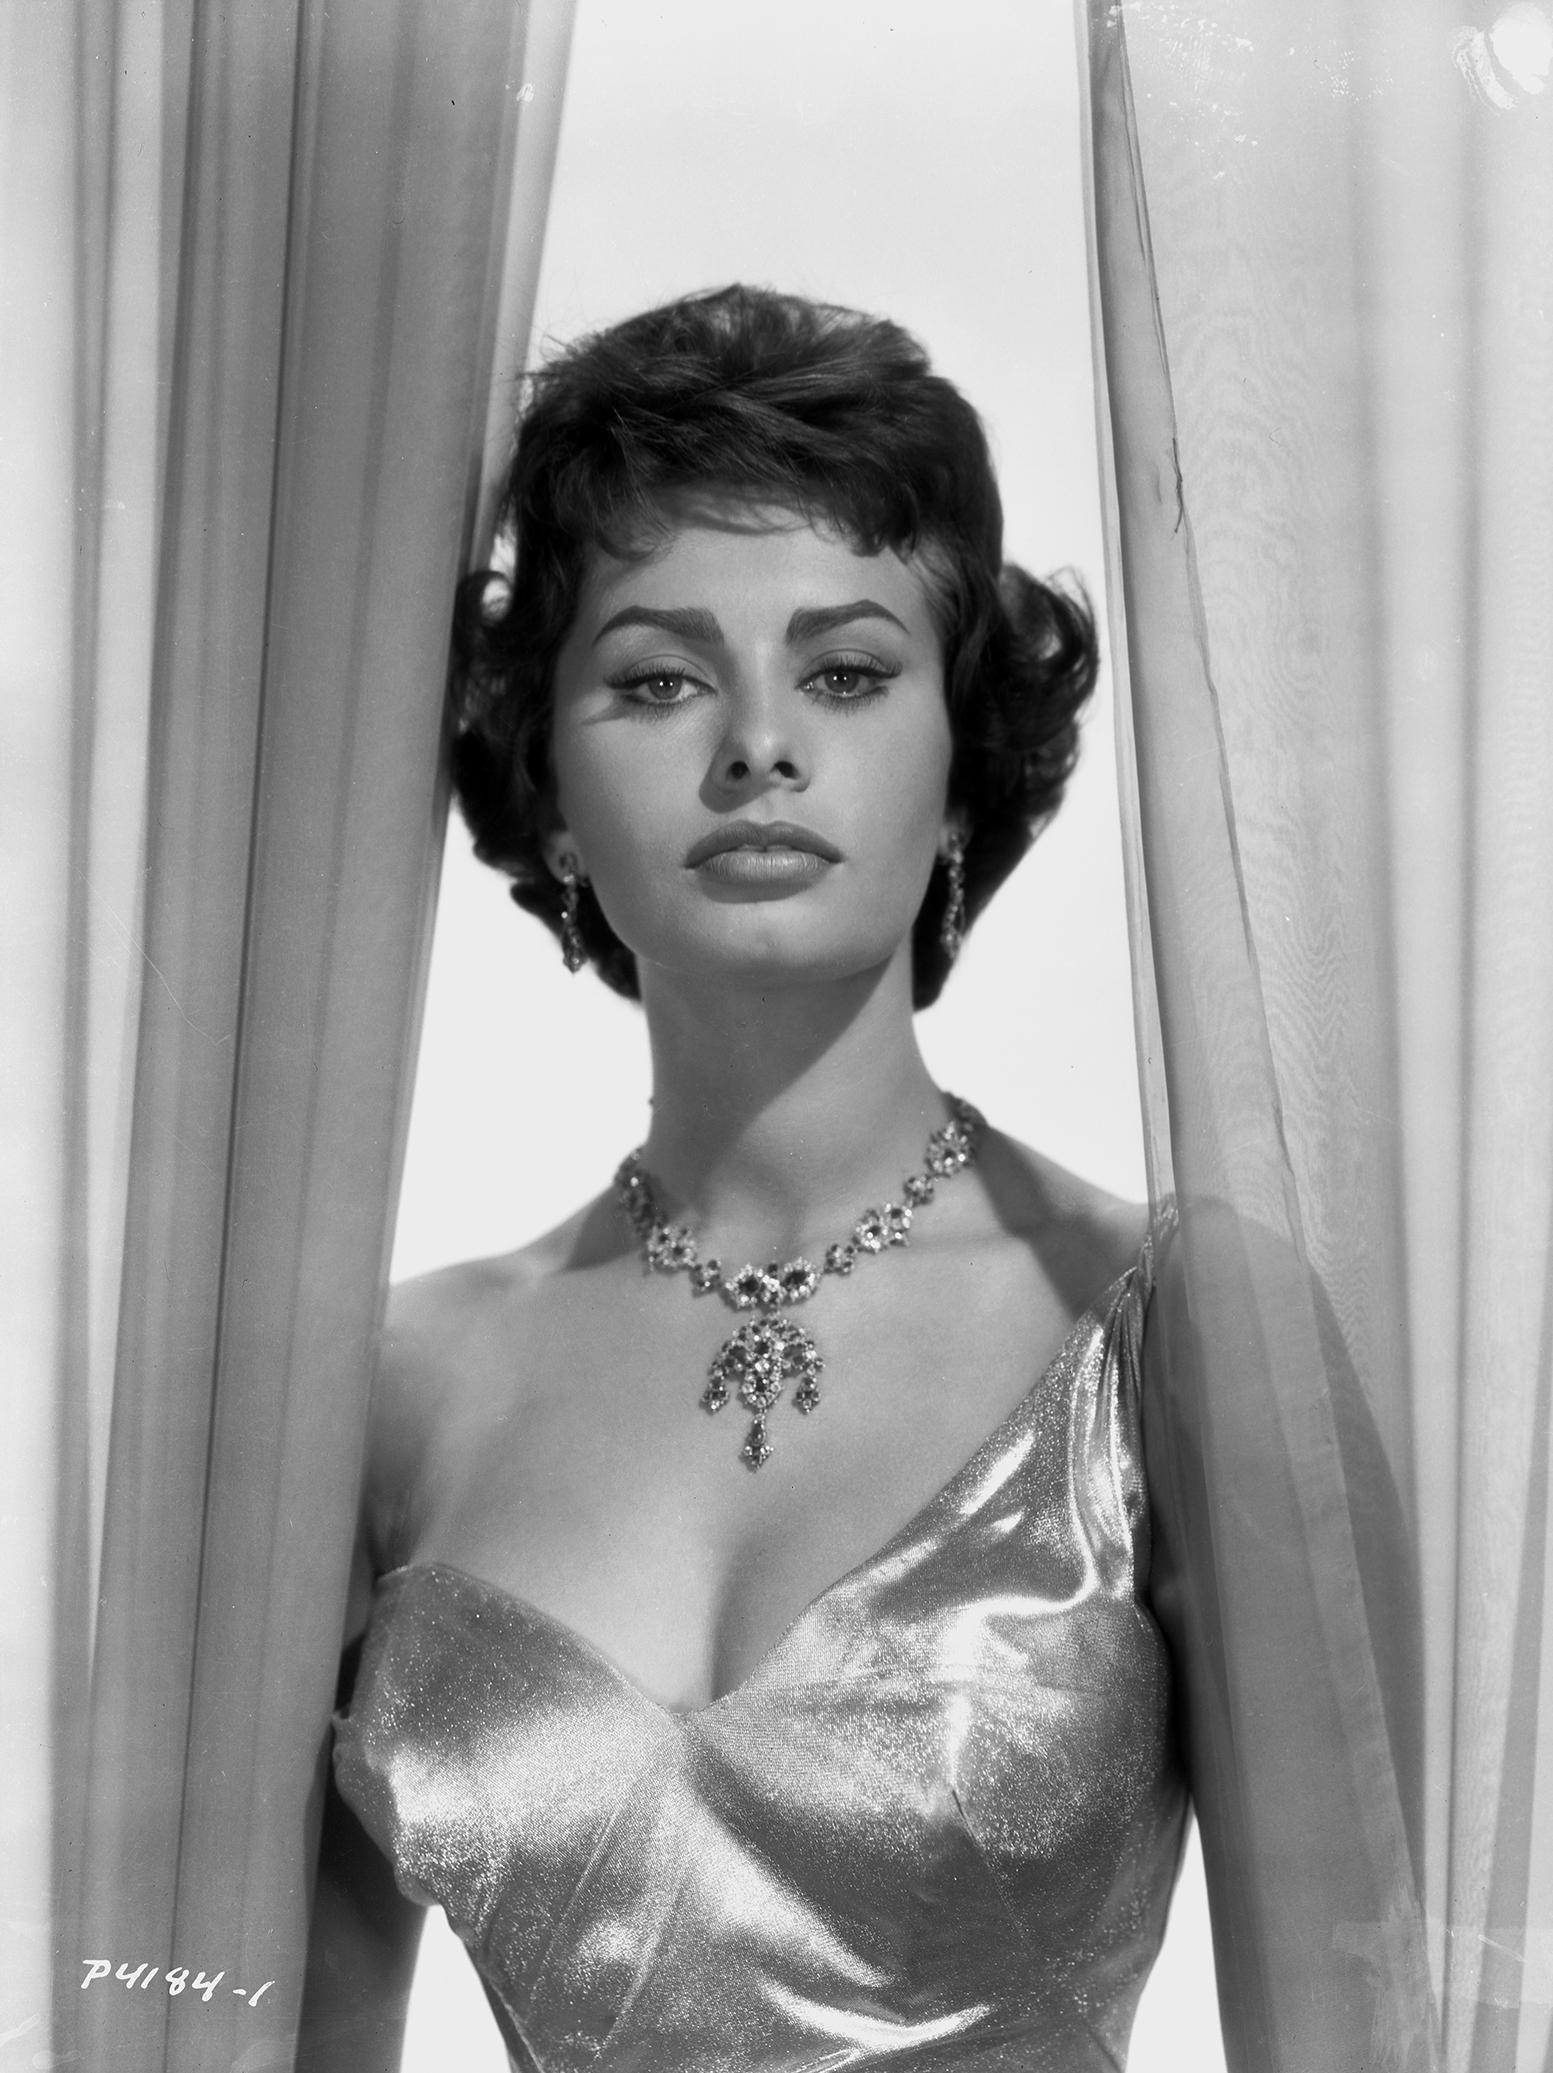 Bud Fraker Black and White Photograph - Sophia Loren in "Houseboat": Between the Curtains